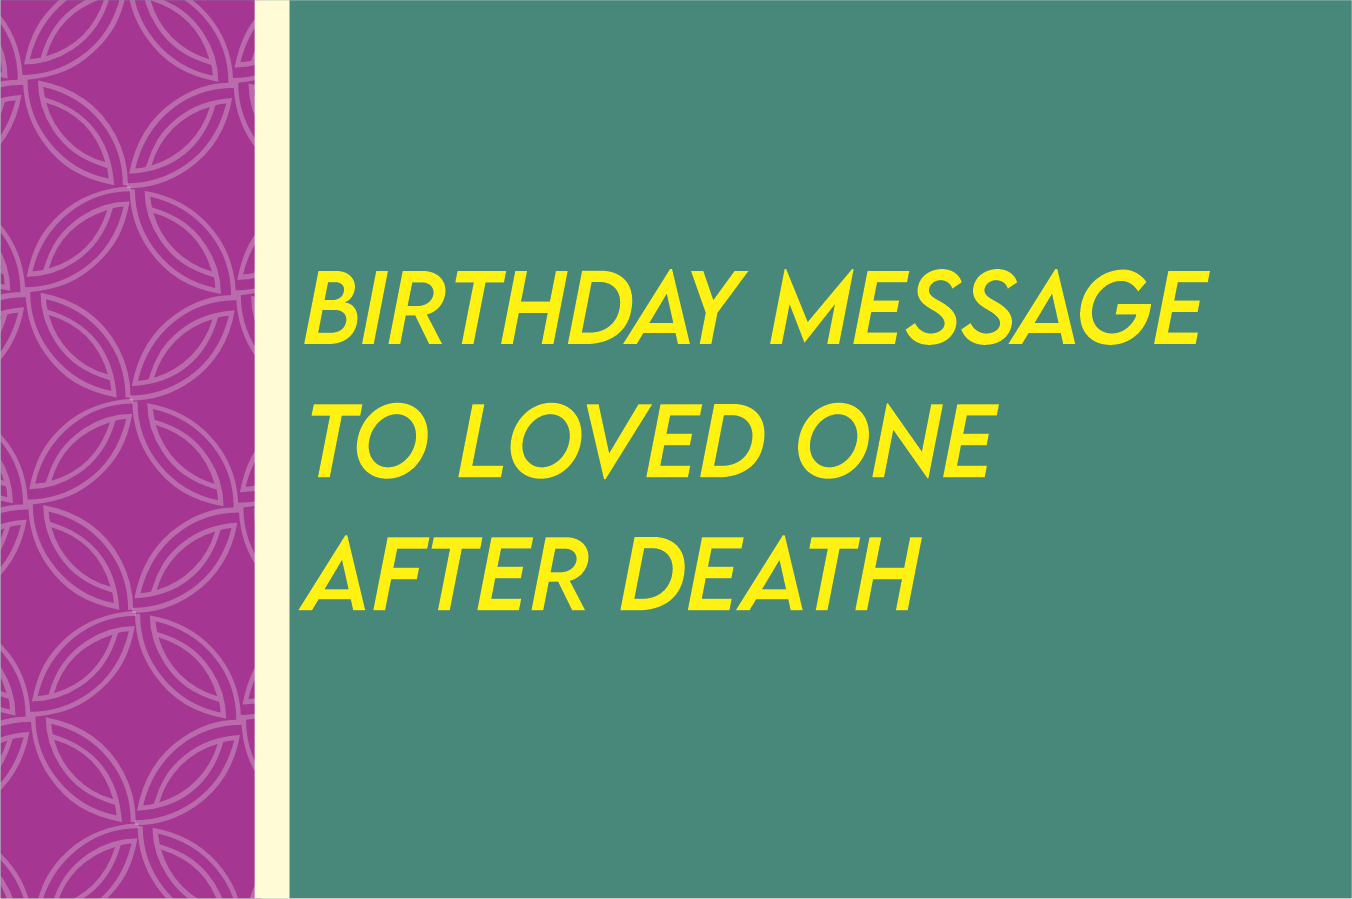 first birthday after death of loved one message